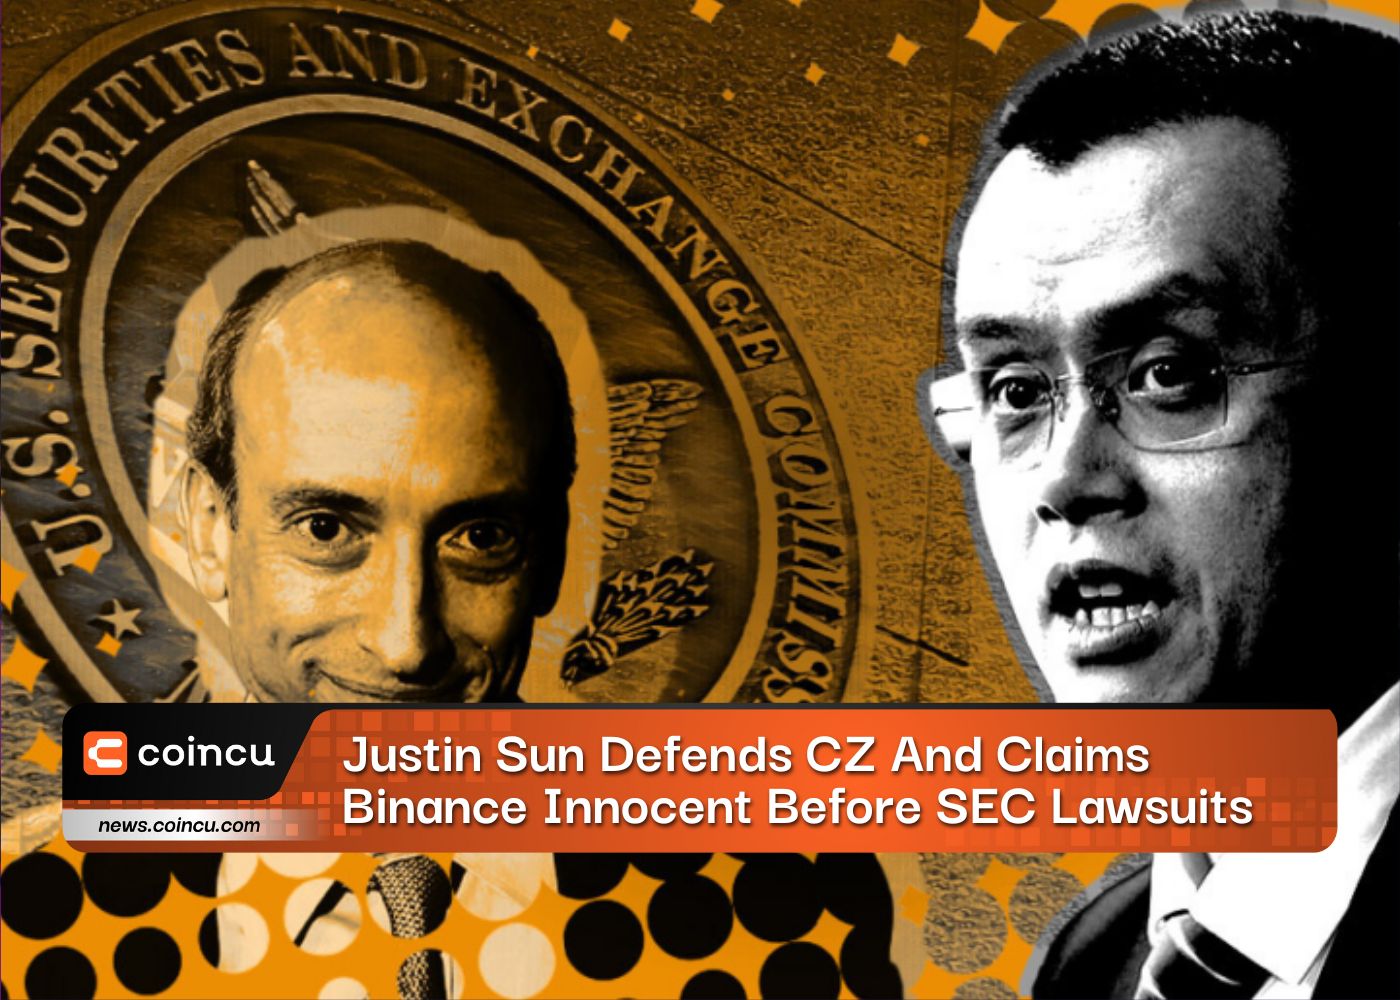 Justin Sun Defends CZ And Claims Binance Innocent Before SEC Lawsuits